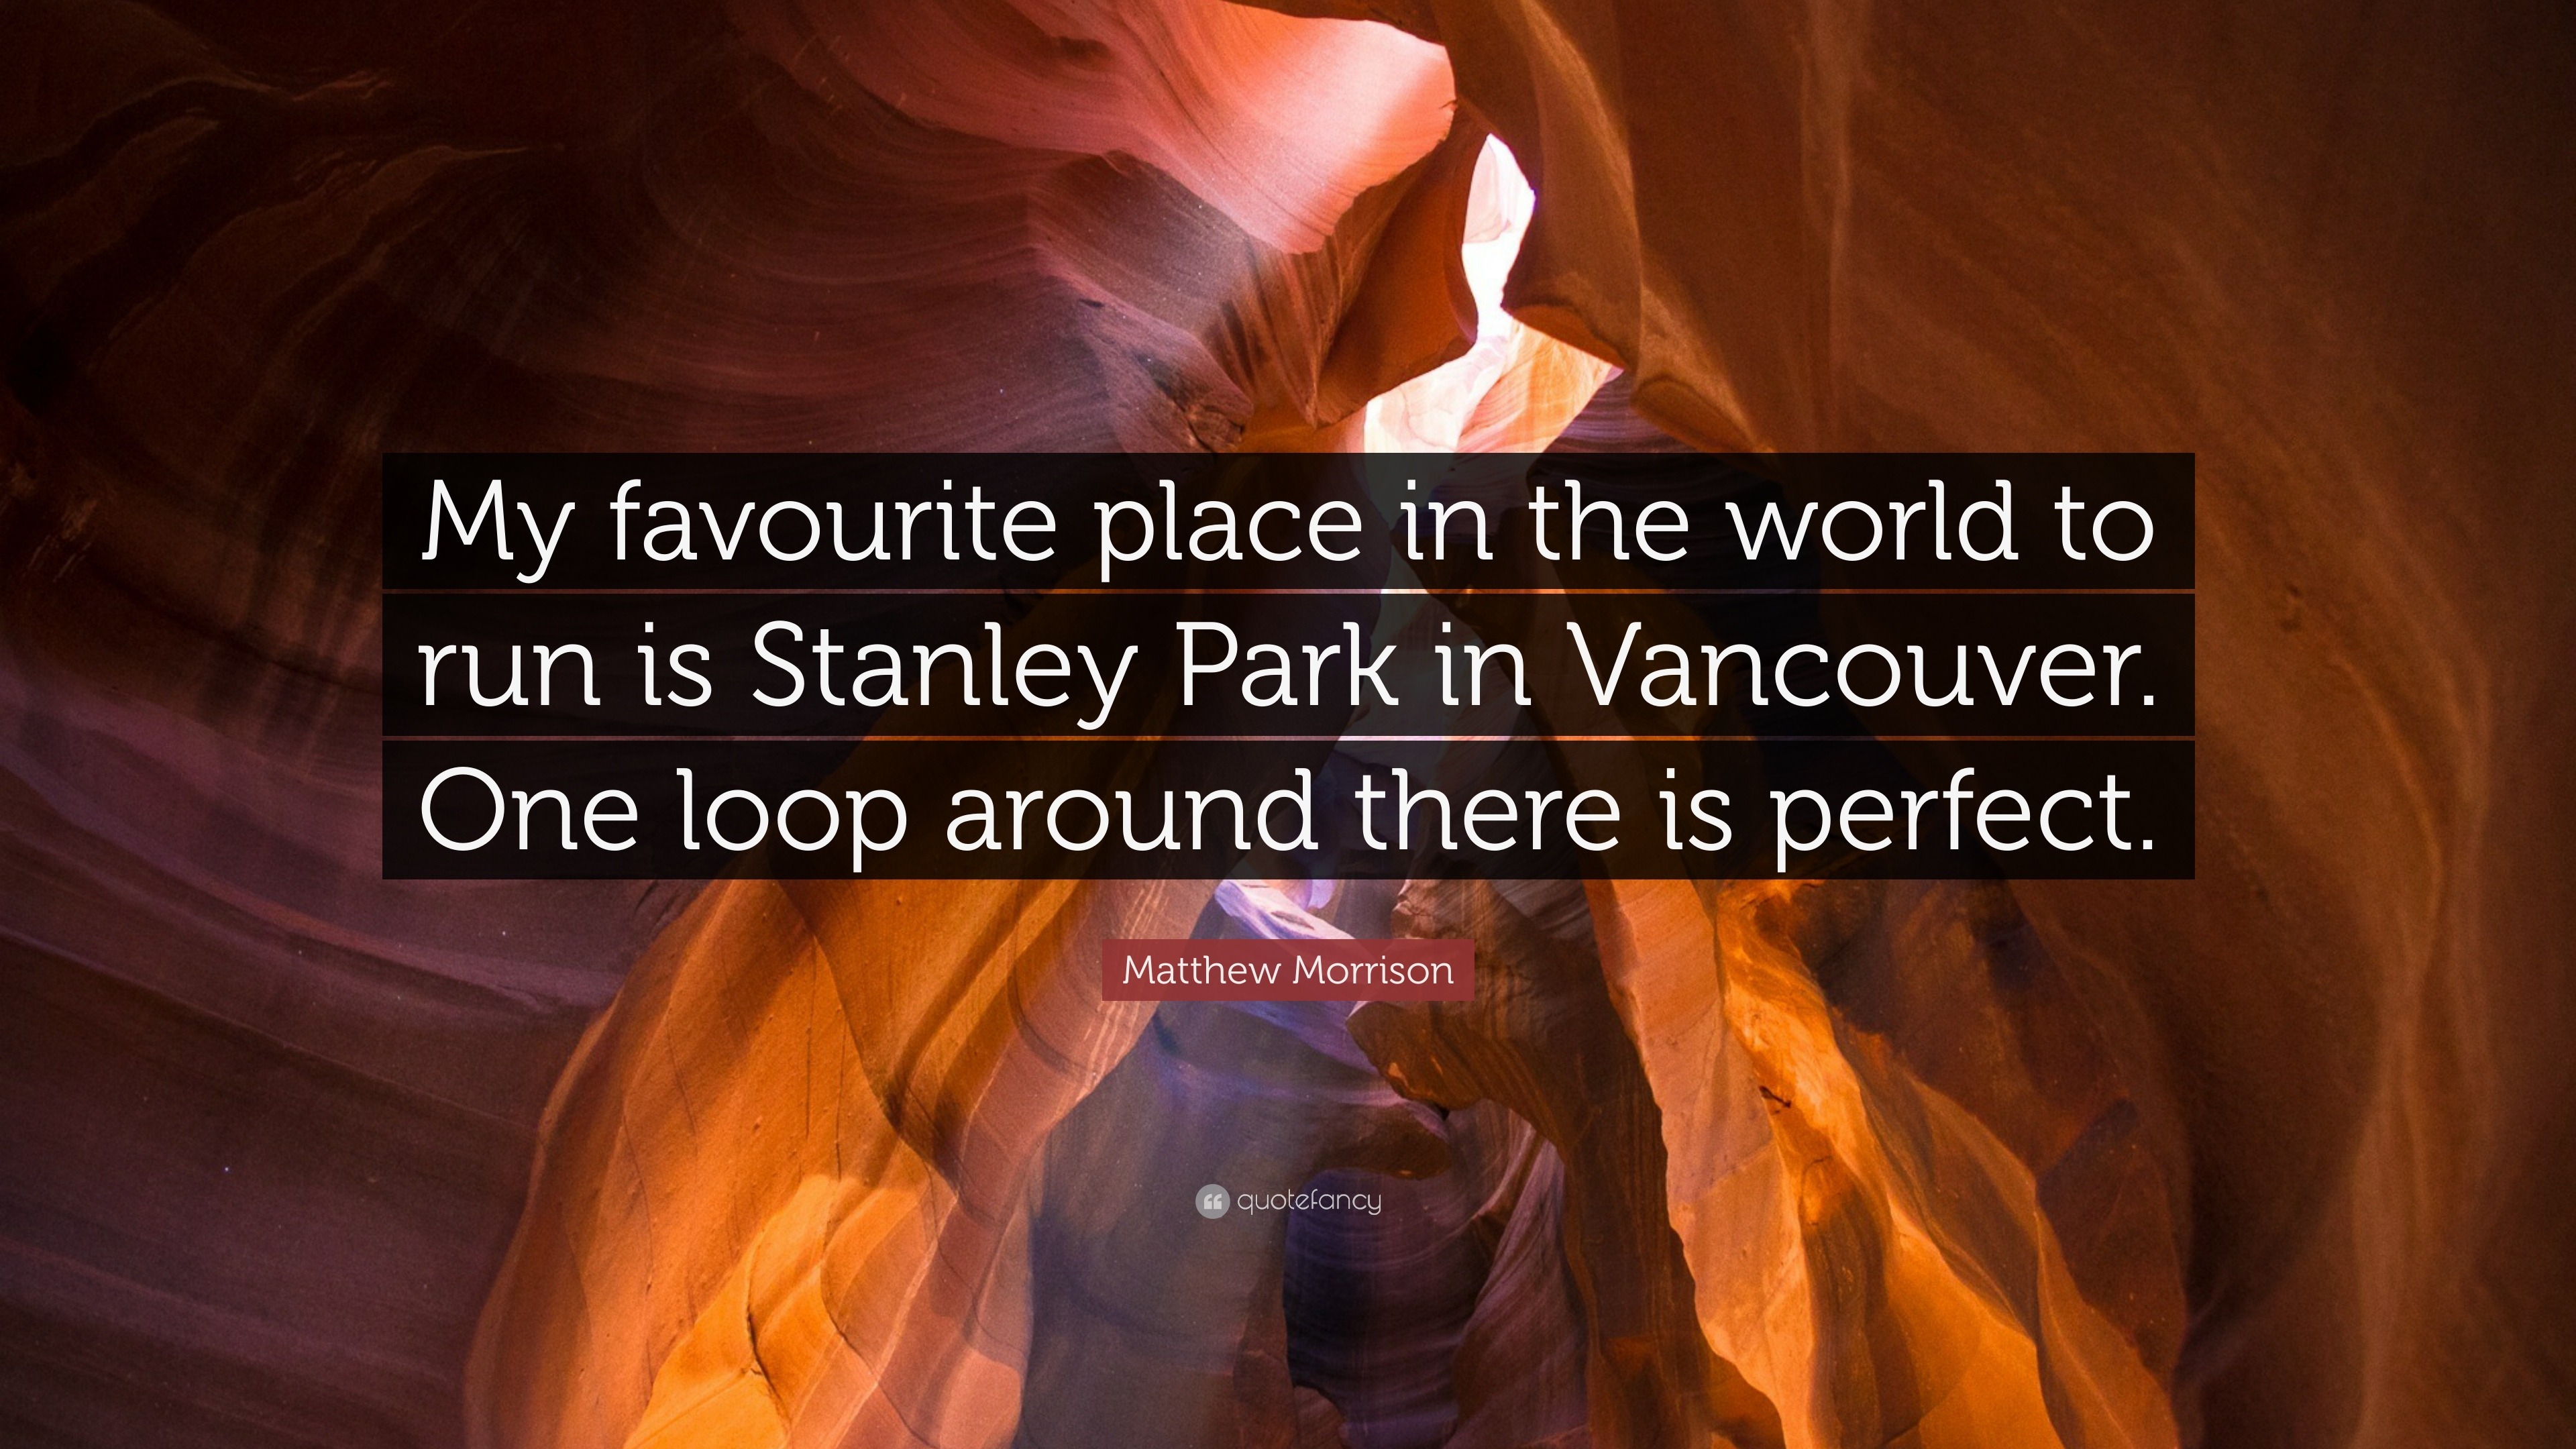 Matthew Morrison Quote “my Favourite Place In The World To Run Is Stanley Park In Vancouver